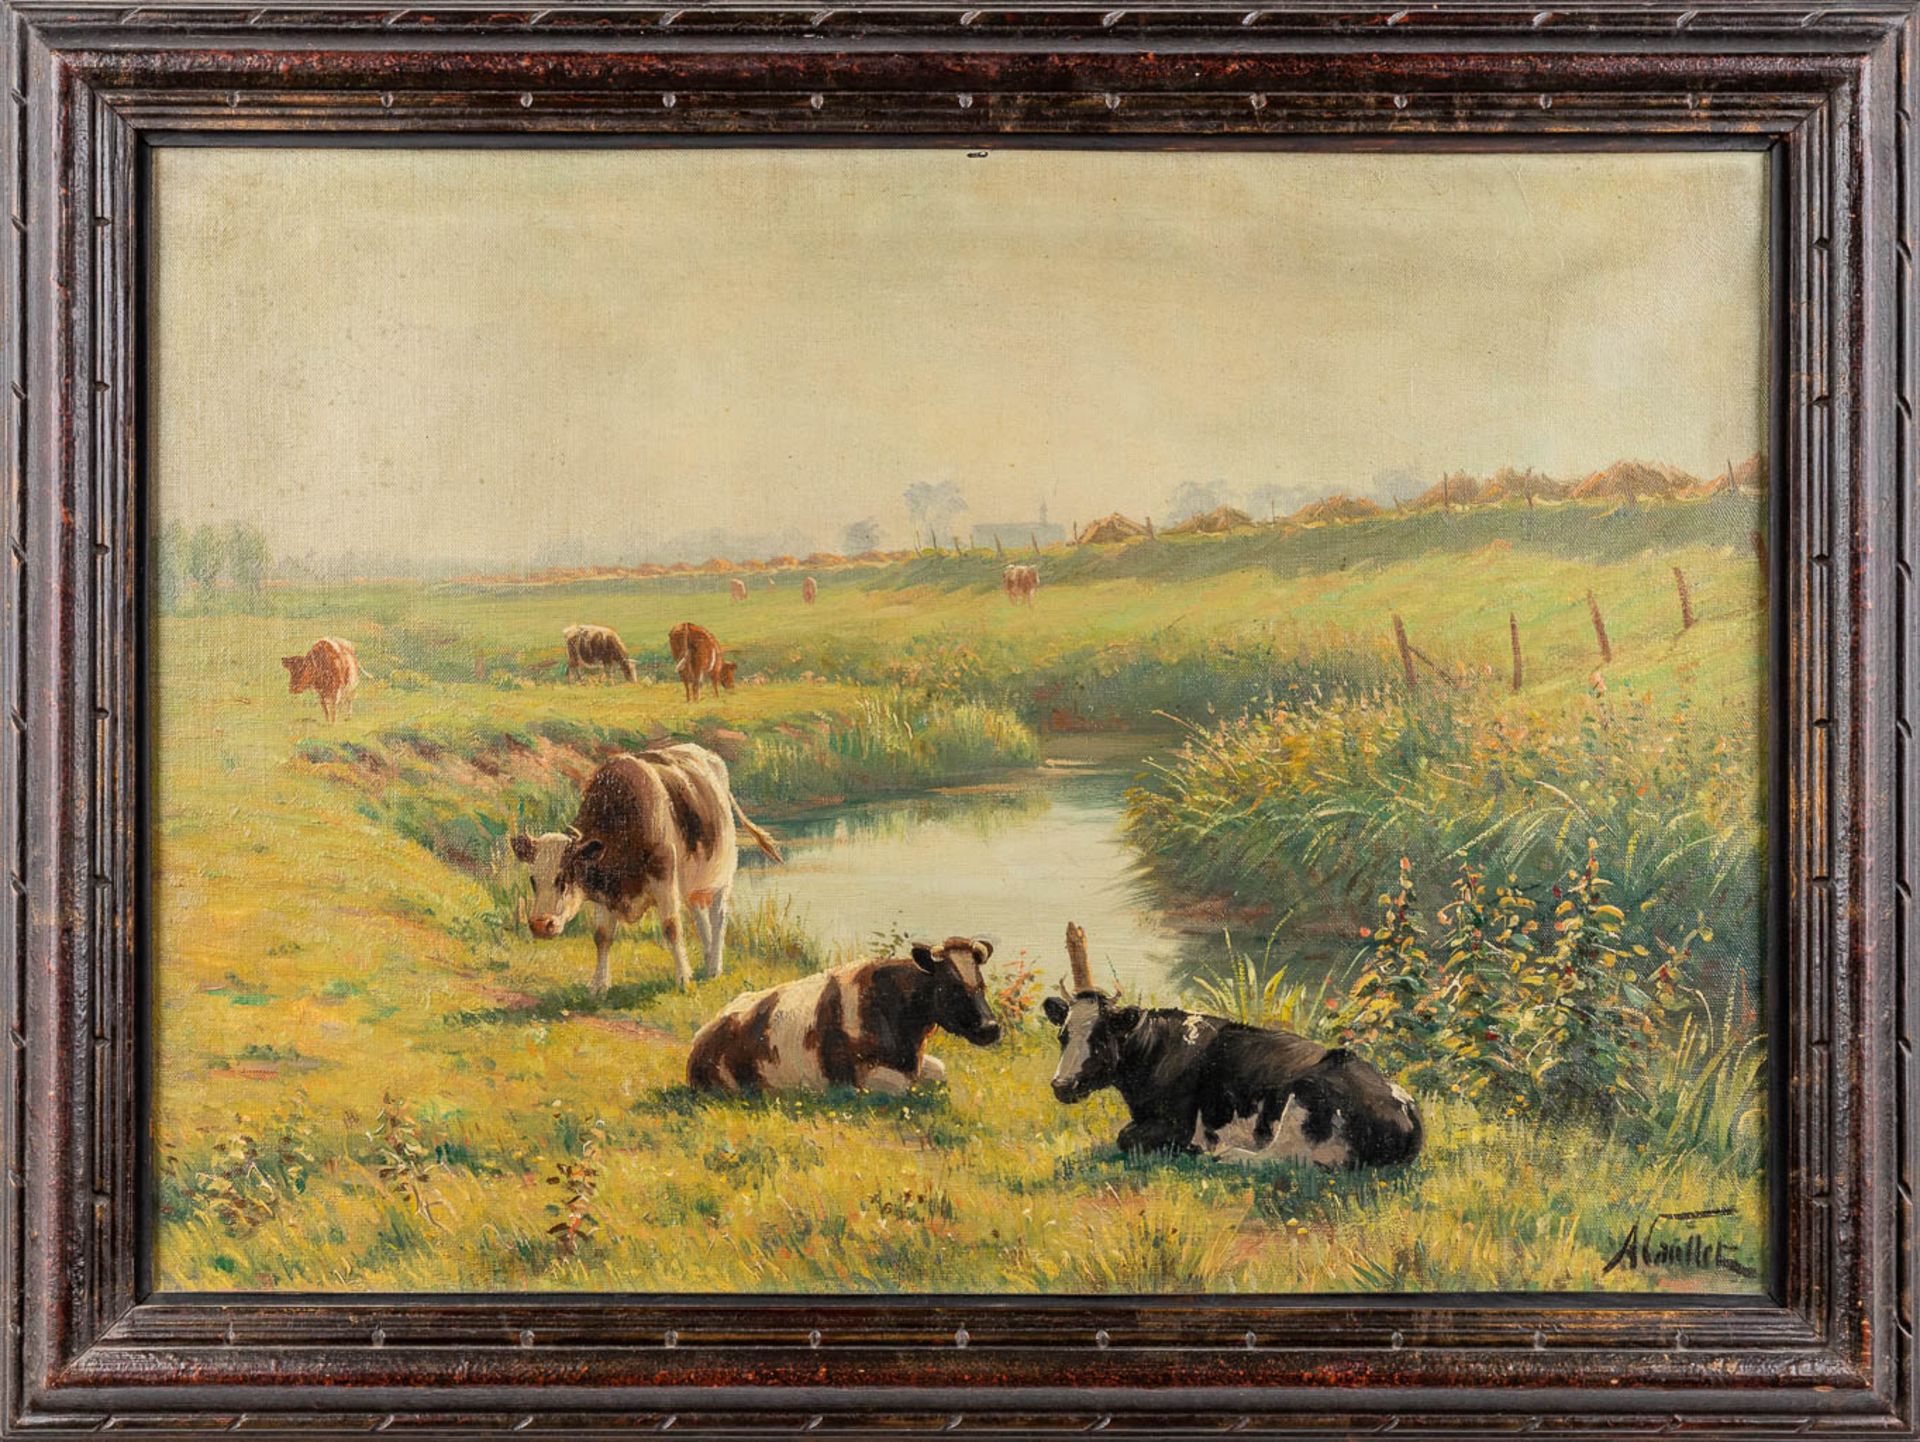 Albert CAULLET (1875-1950) 'Cows in the field' a painting, oil on canvas. (W:70 x H:50 cm) - Image 3 of 7